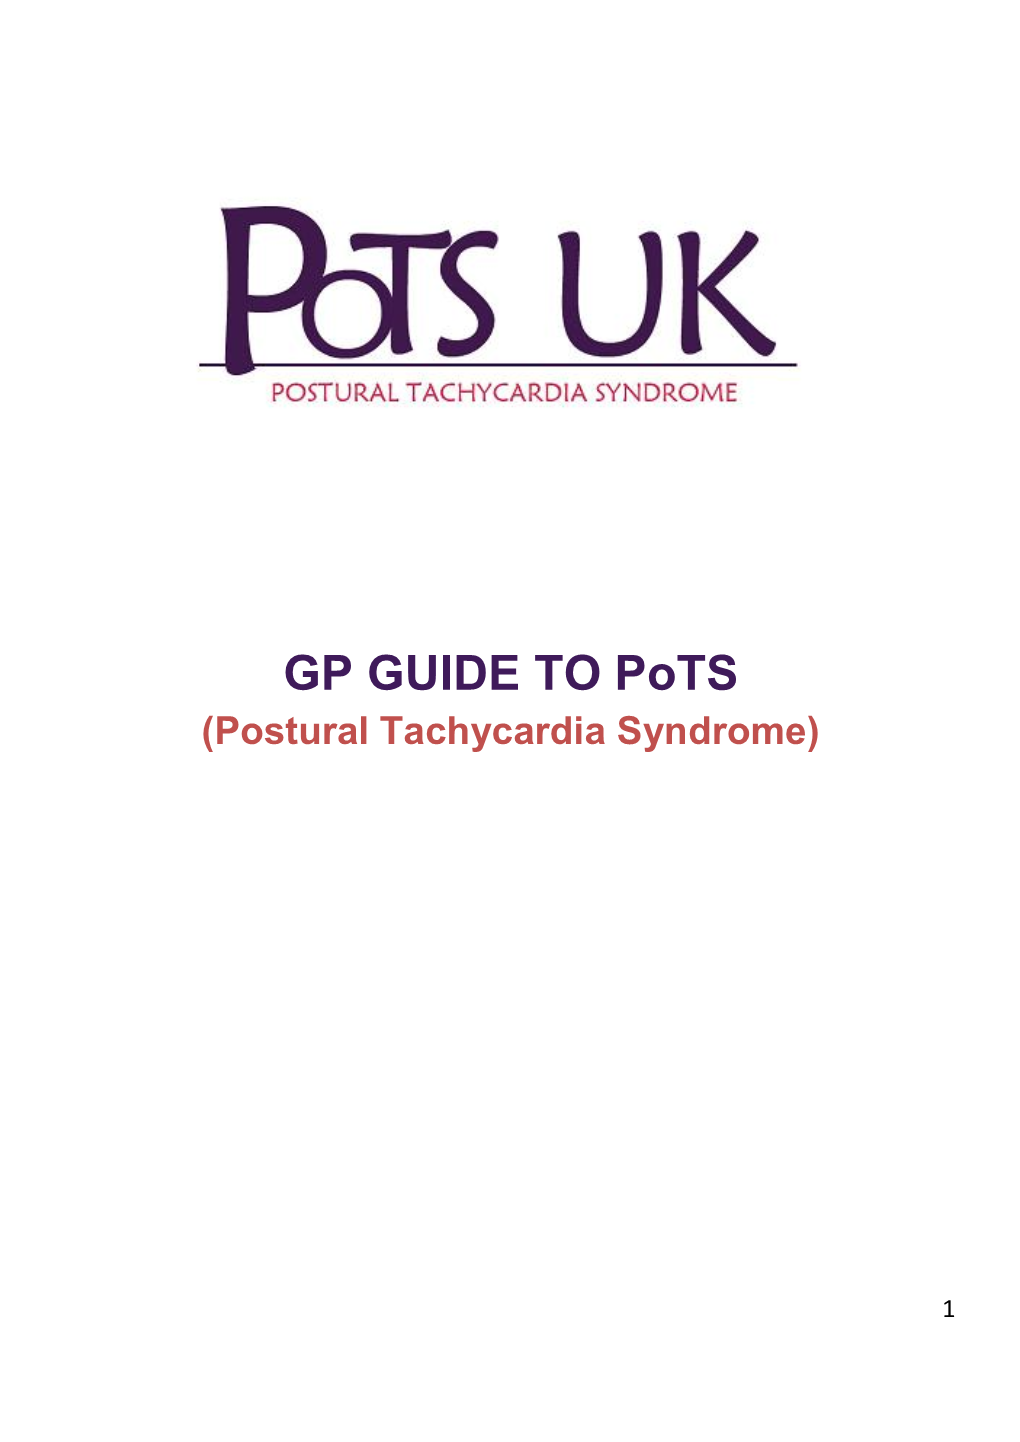 GP GUIDE to Pots (Postural Tachycardia Syndrome)